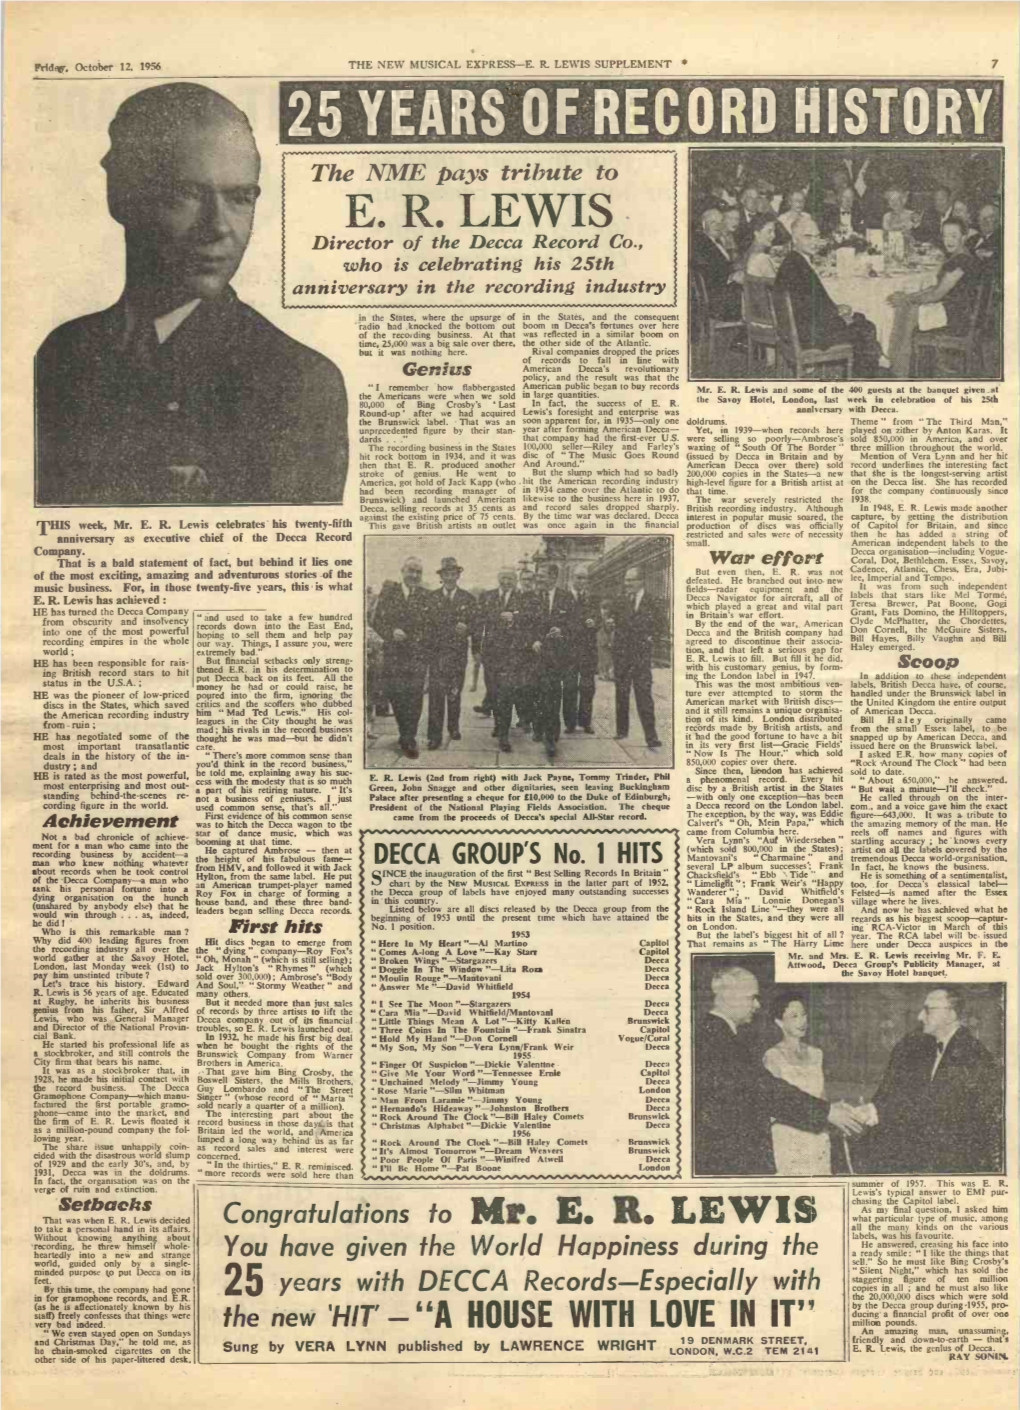 E. R. LEWIS SUPPLEMENT * 7 25 YEARS 0RECORD HISTORY the NME Pays Tribute to E